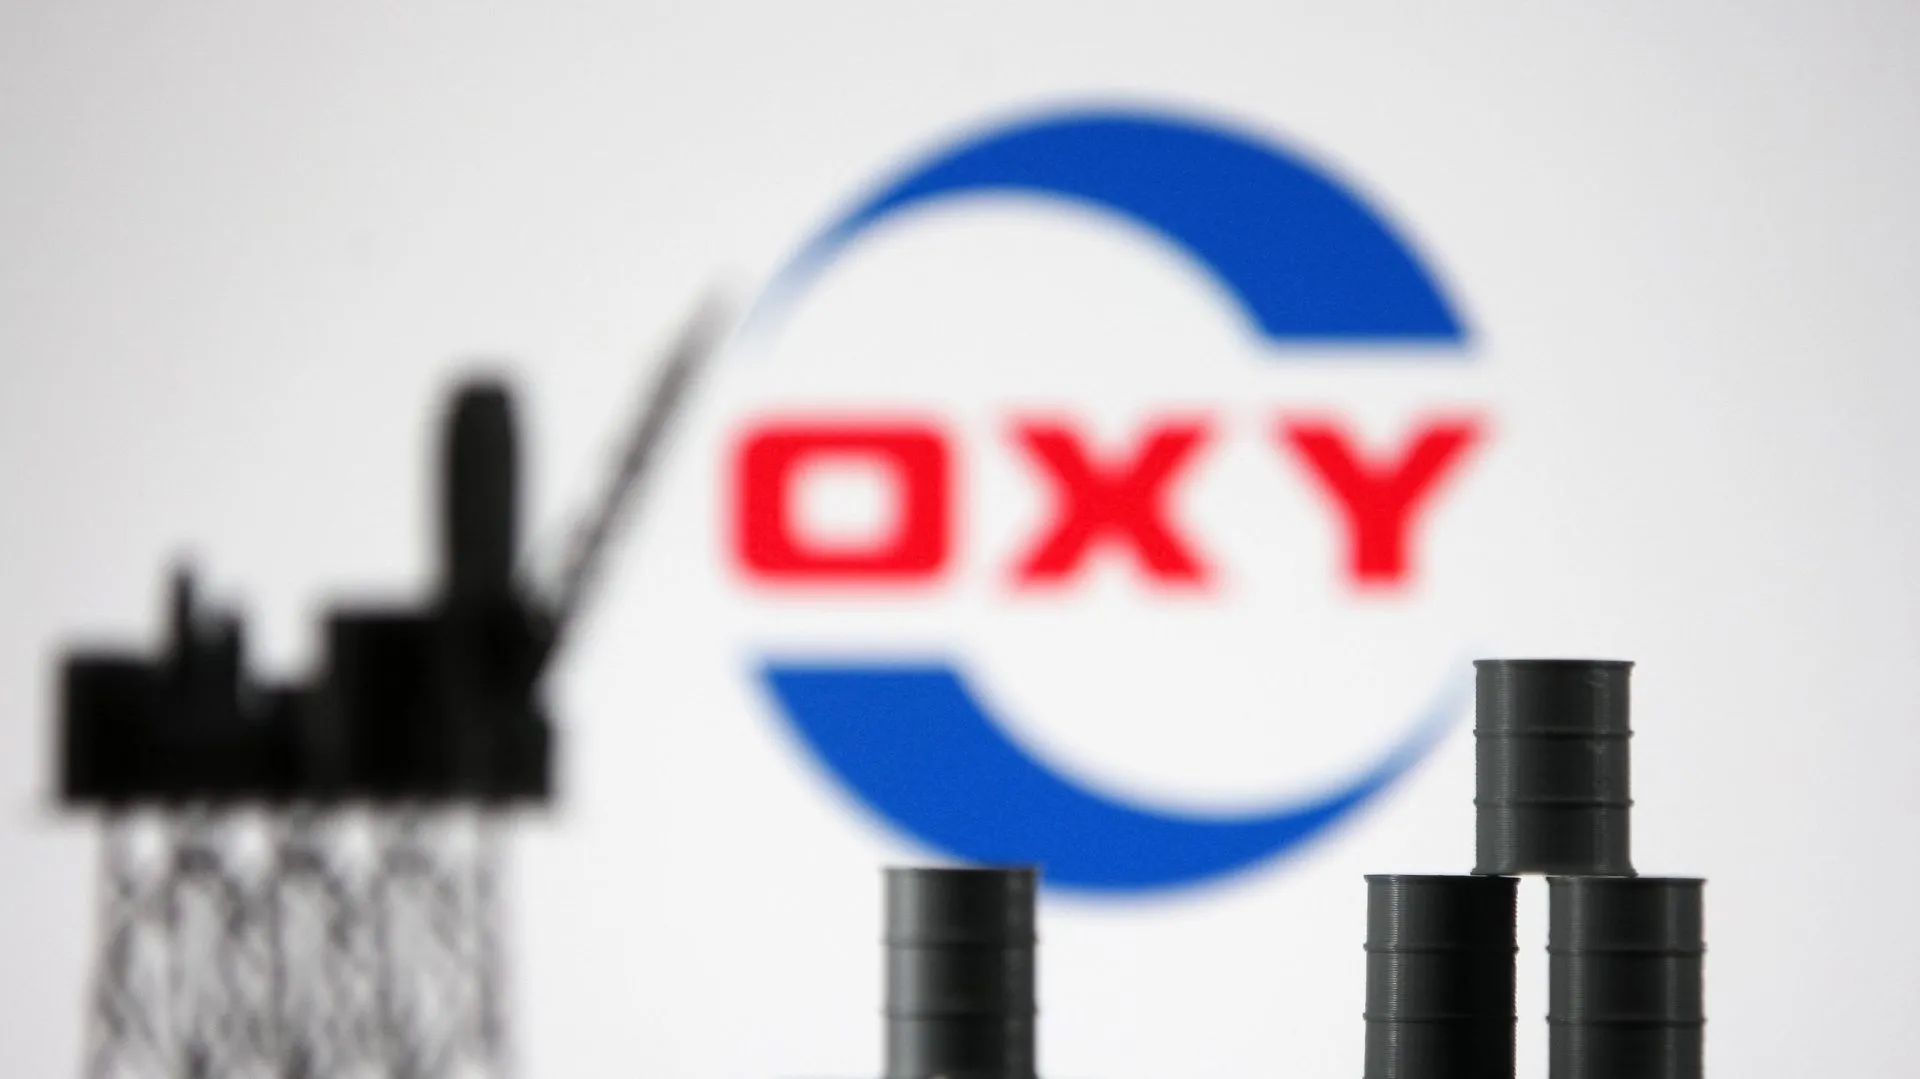 Mandatory Credit: Photo by Vladimir Sindeyeve/NurPhoto/Shutterstock (12342408u)Occidental Petroleum Corporation (OXY) logo and models of an oil rig and oil barrels are pictured in this illustration photo taken in Kyiv on 19 August, 2021.